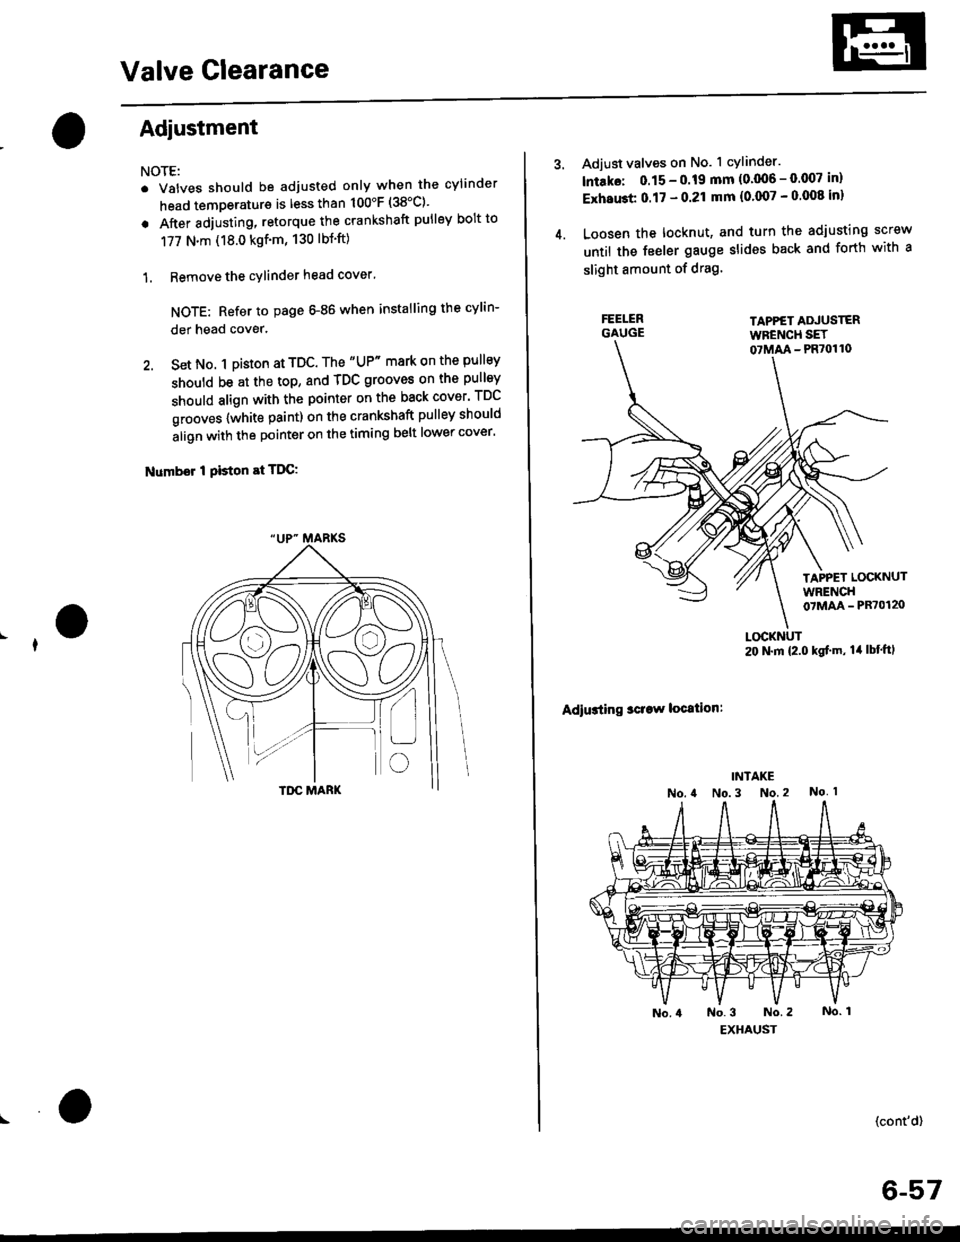 HONDA CIVIC 1996 6.G Owners Guide Valve Glearance
Adjustment
NOTE:
. Valves should be adjusted only when the cylinder
head temperaturs is less than 100F (38C)
. After adjusting, retorque the crankshaft pulley bolt to
177 N.m (18.0 